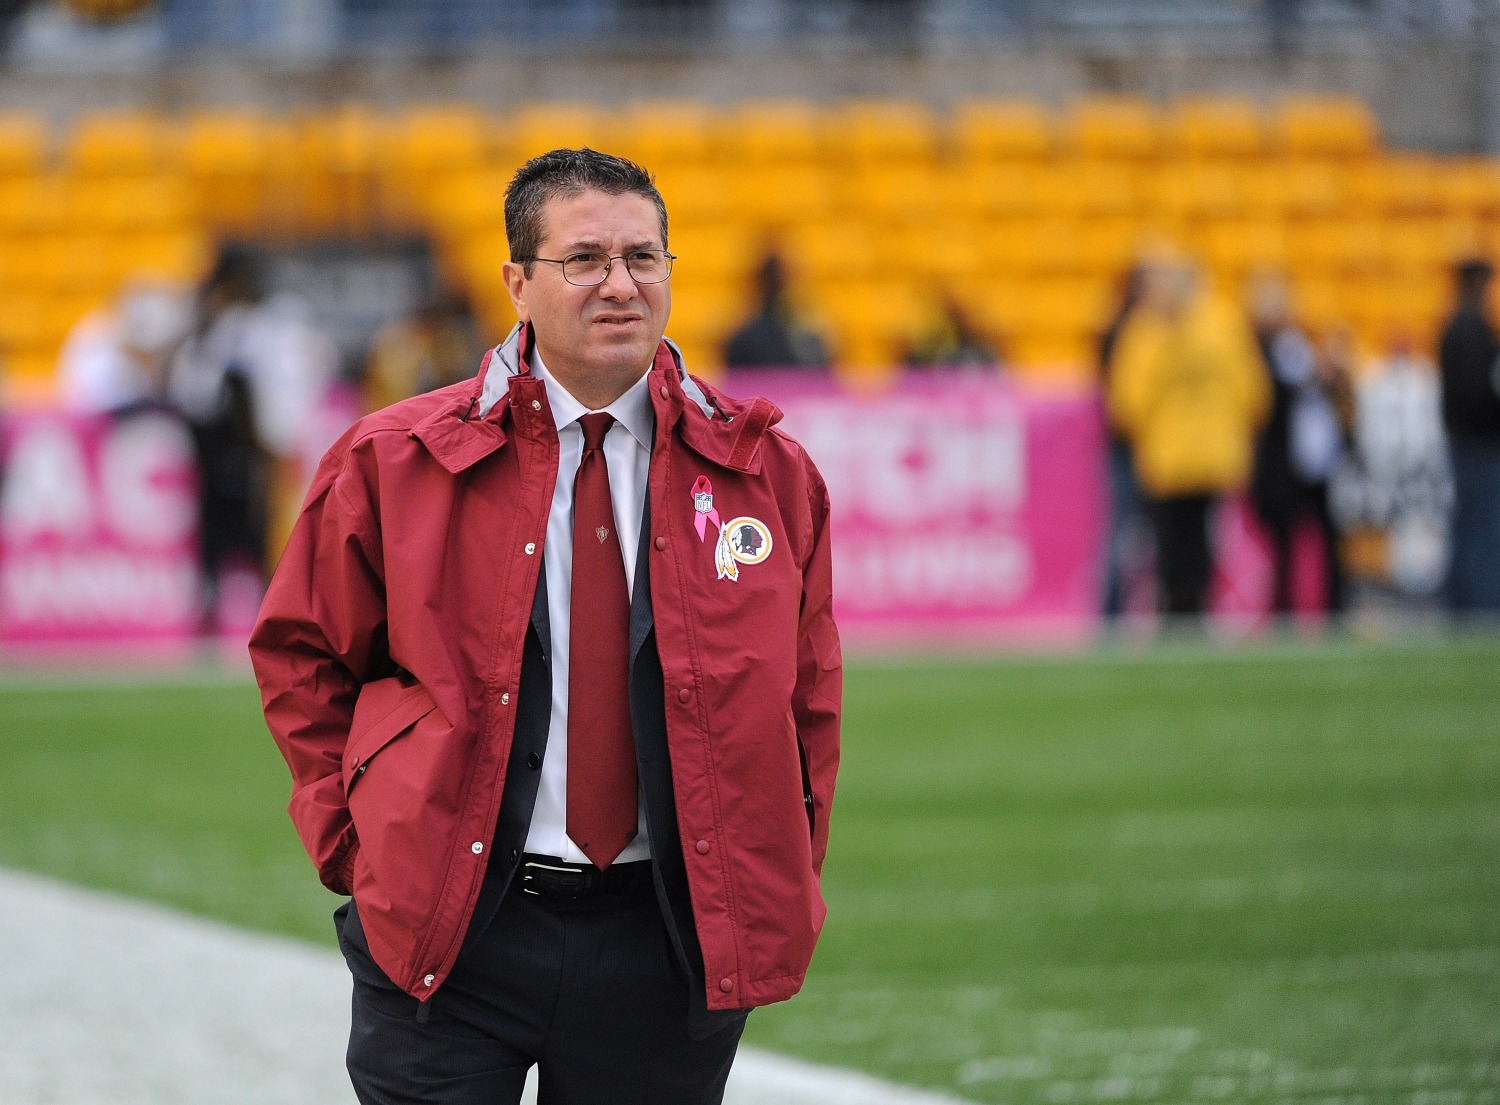 Dan Snyder faces a monumental decision in changing the Redskins name with pressure mounting from investors.